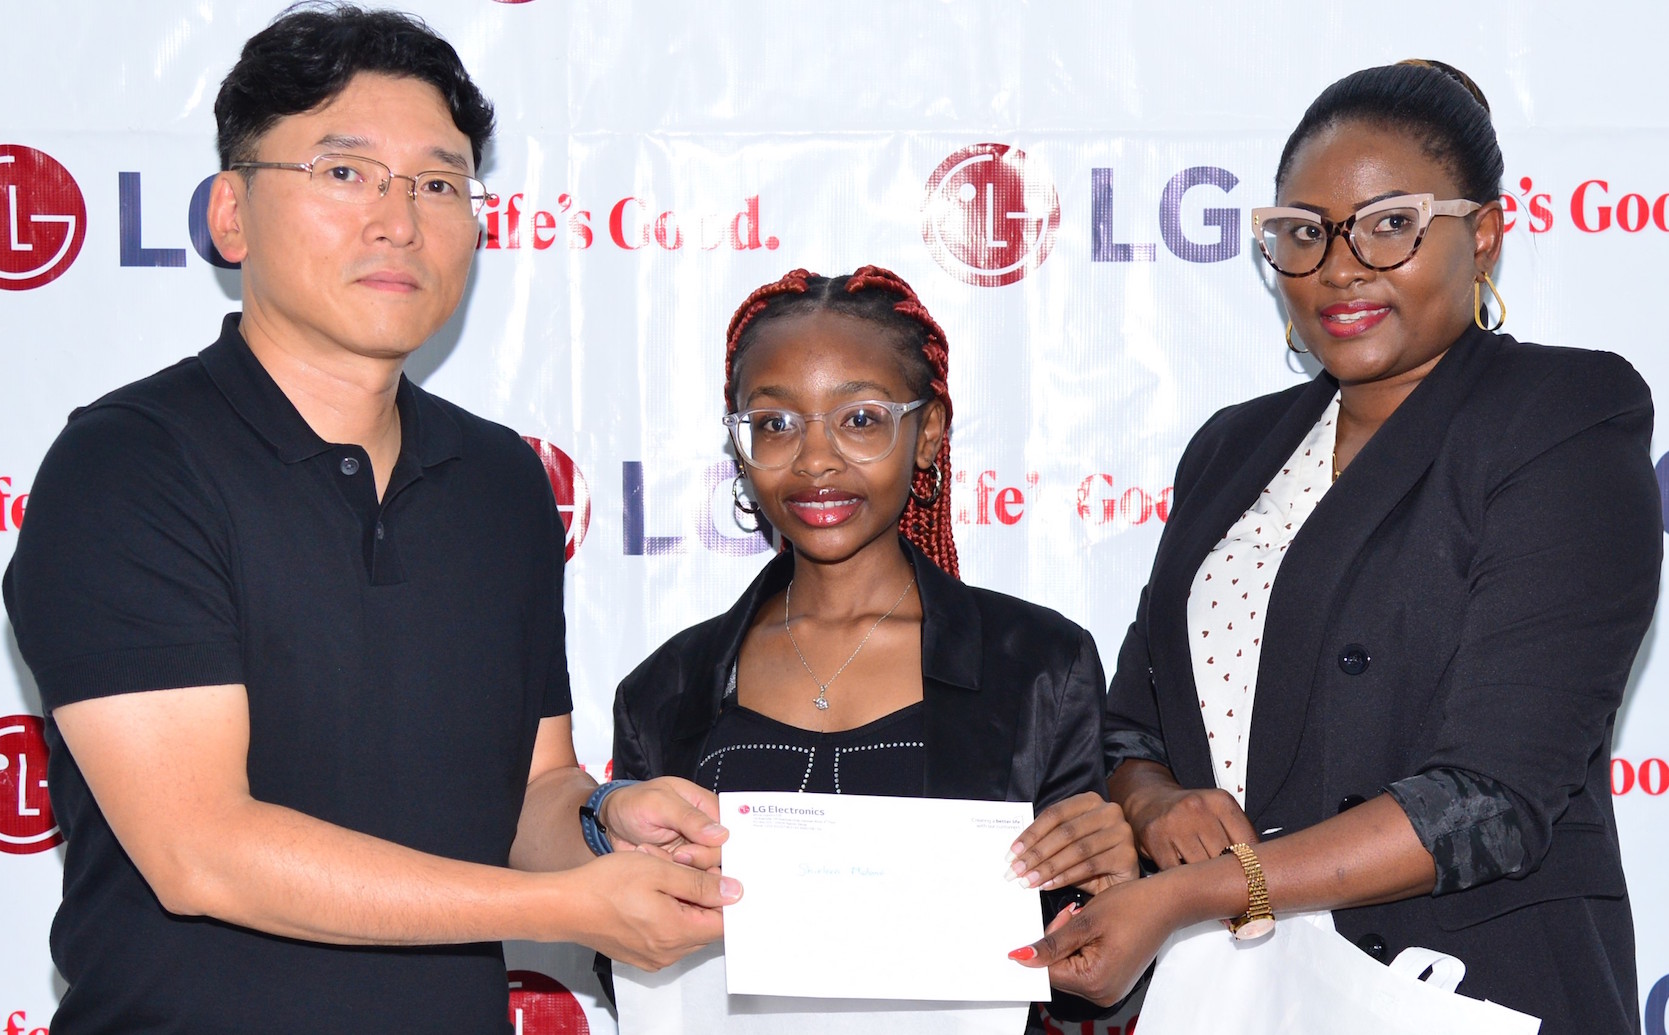 L-R), LG Electronics HA Product Manager Junho Seo presents shopping vouchers to the winners of the #LGDressUpChallenge, Shirley Ndanu Mutula and Margaret Oyaro, during an exclusive ceremony held at LG offices. The challenge invited Kenyans on social media to impersonate their favorite Playmobil characters (JJ, Henry, or Nora) while adding their unique creative twists to their narratives.